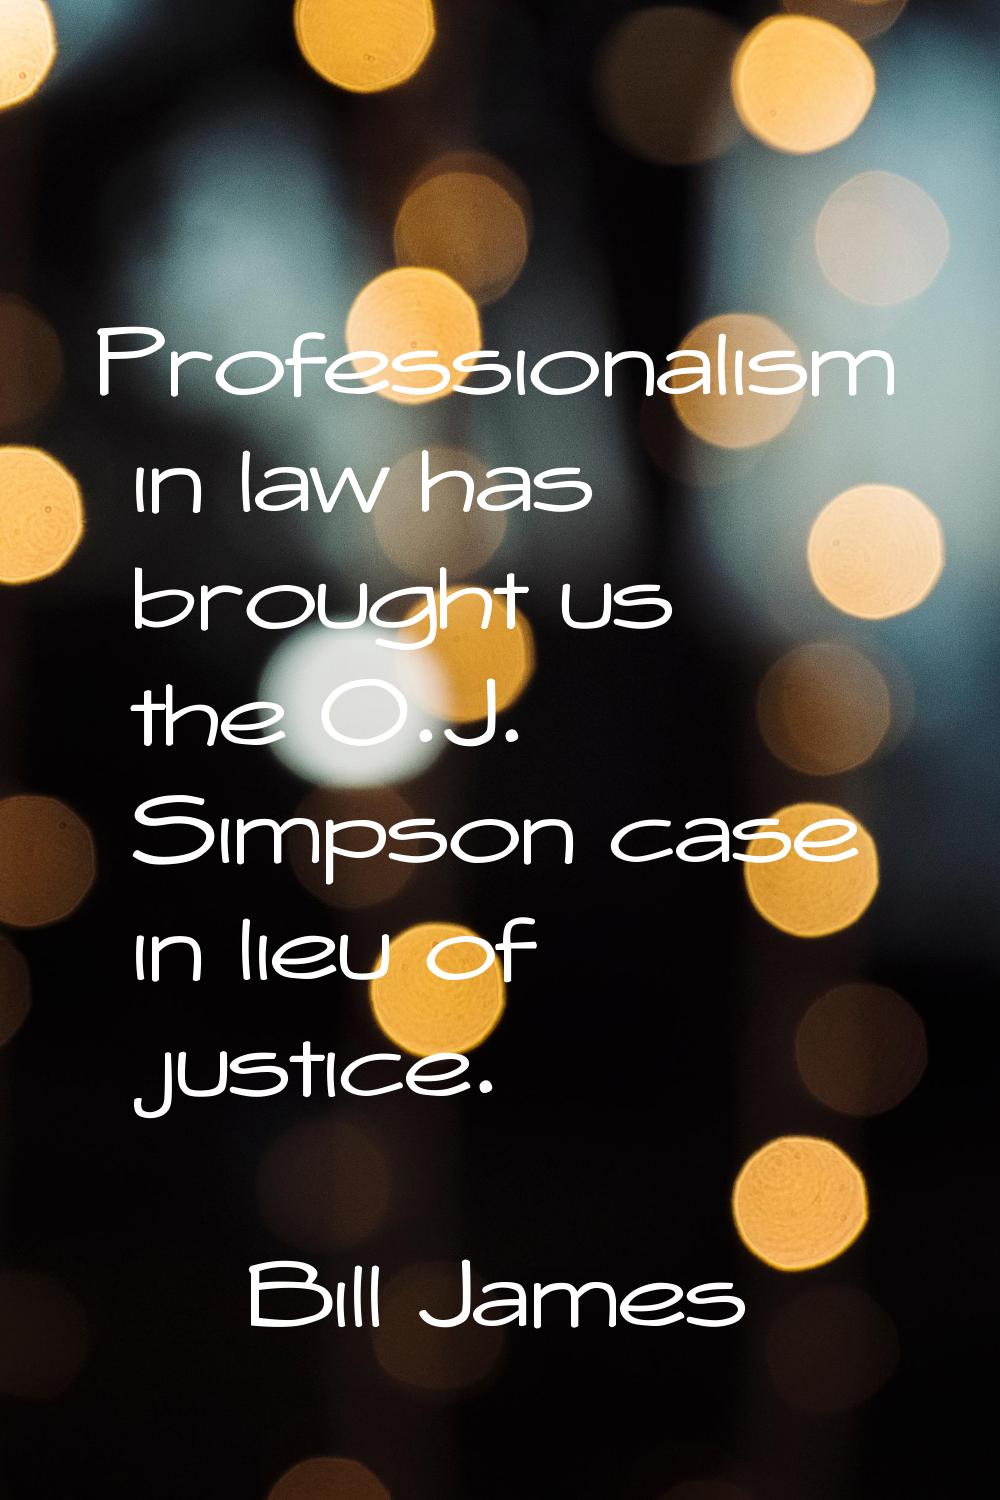 Professionalism in law has brought us the O.J. Simpson case in lieu of justice.